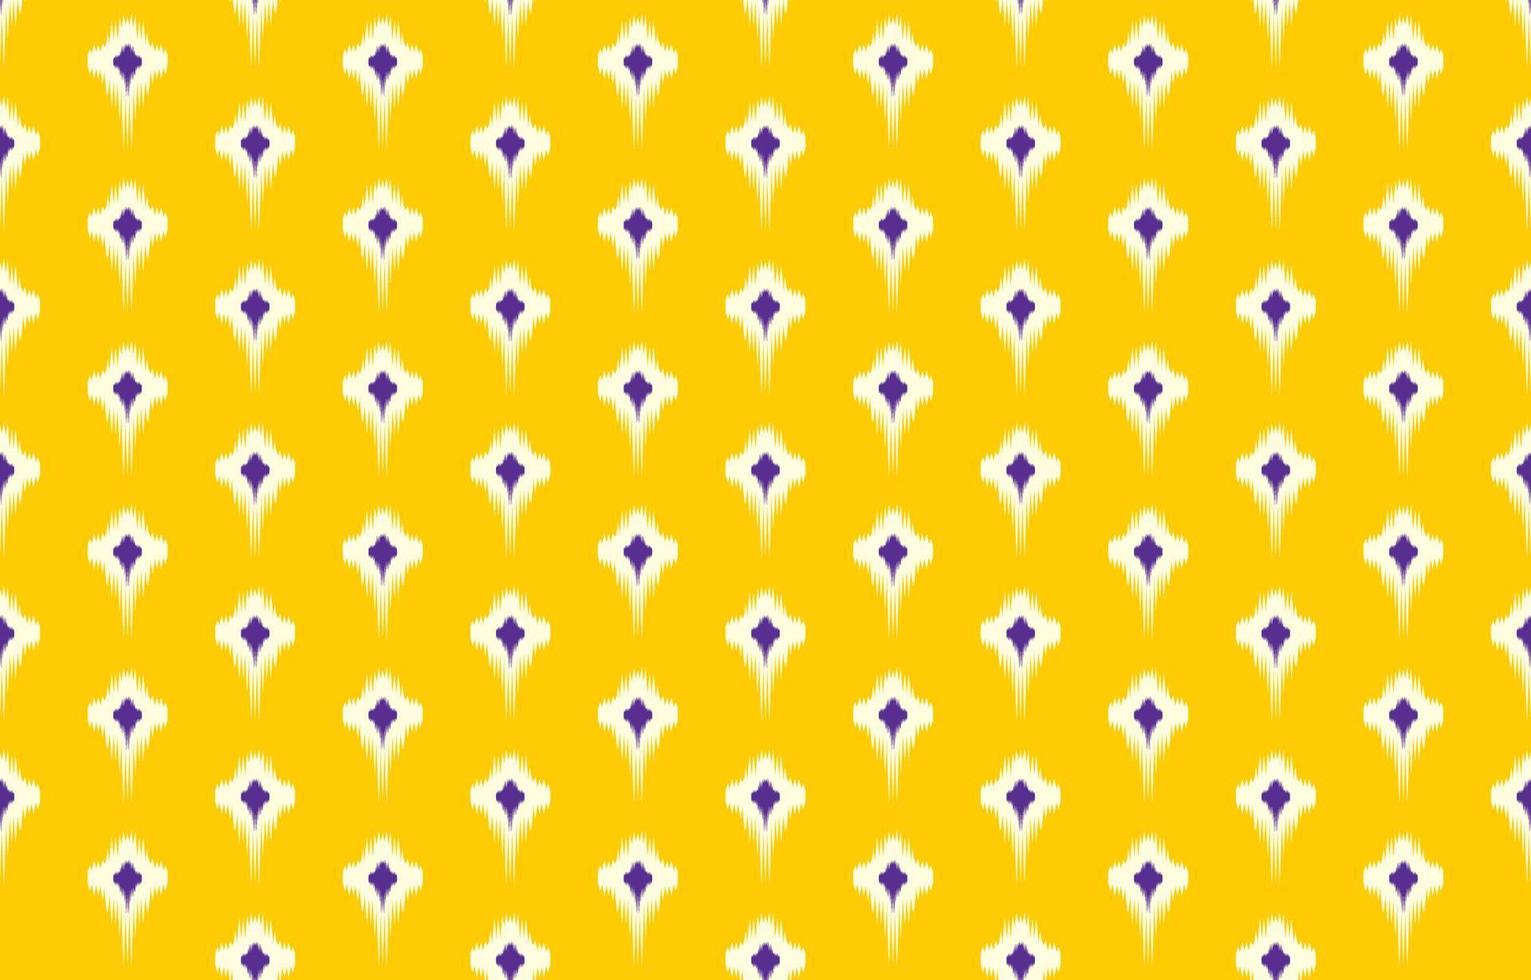 Ikat ethnic design background. Seamless ikat yellow pattern in tribal, folk embroidery abstract art. Aztec geometric art ornament print.Design for carpet, wallpaper, clothing, wrapping, fabric, cover vector